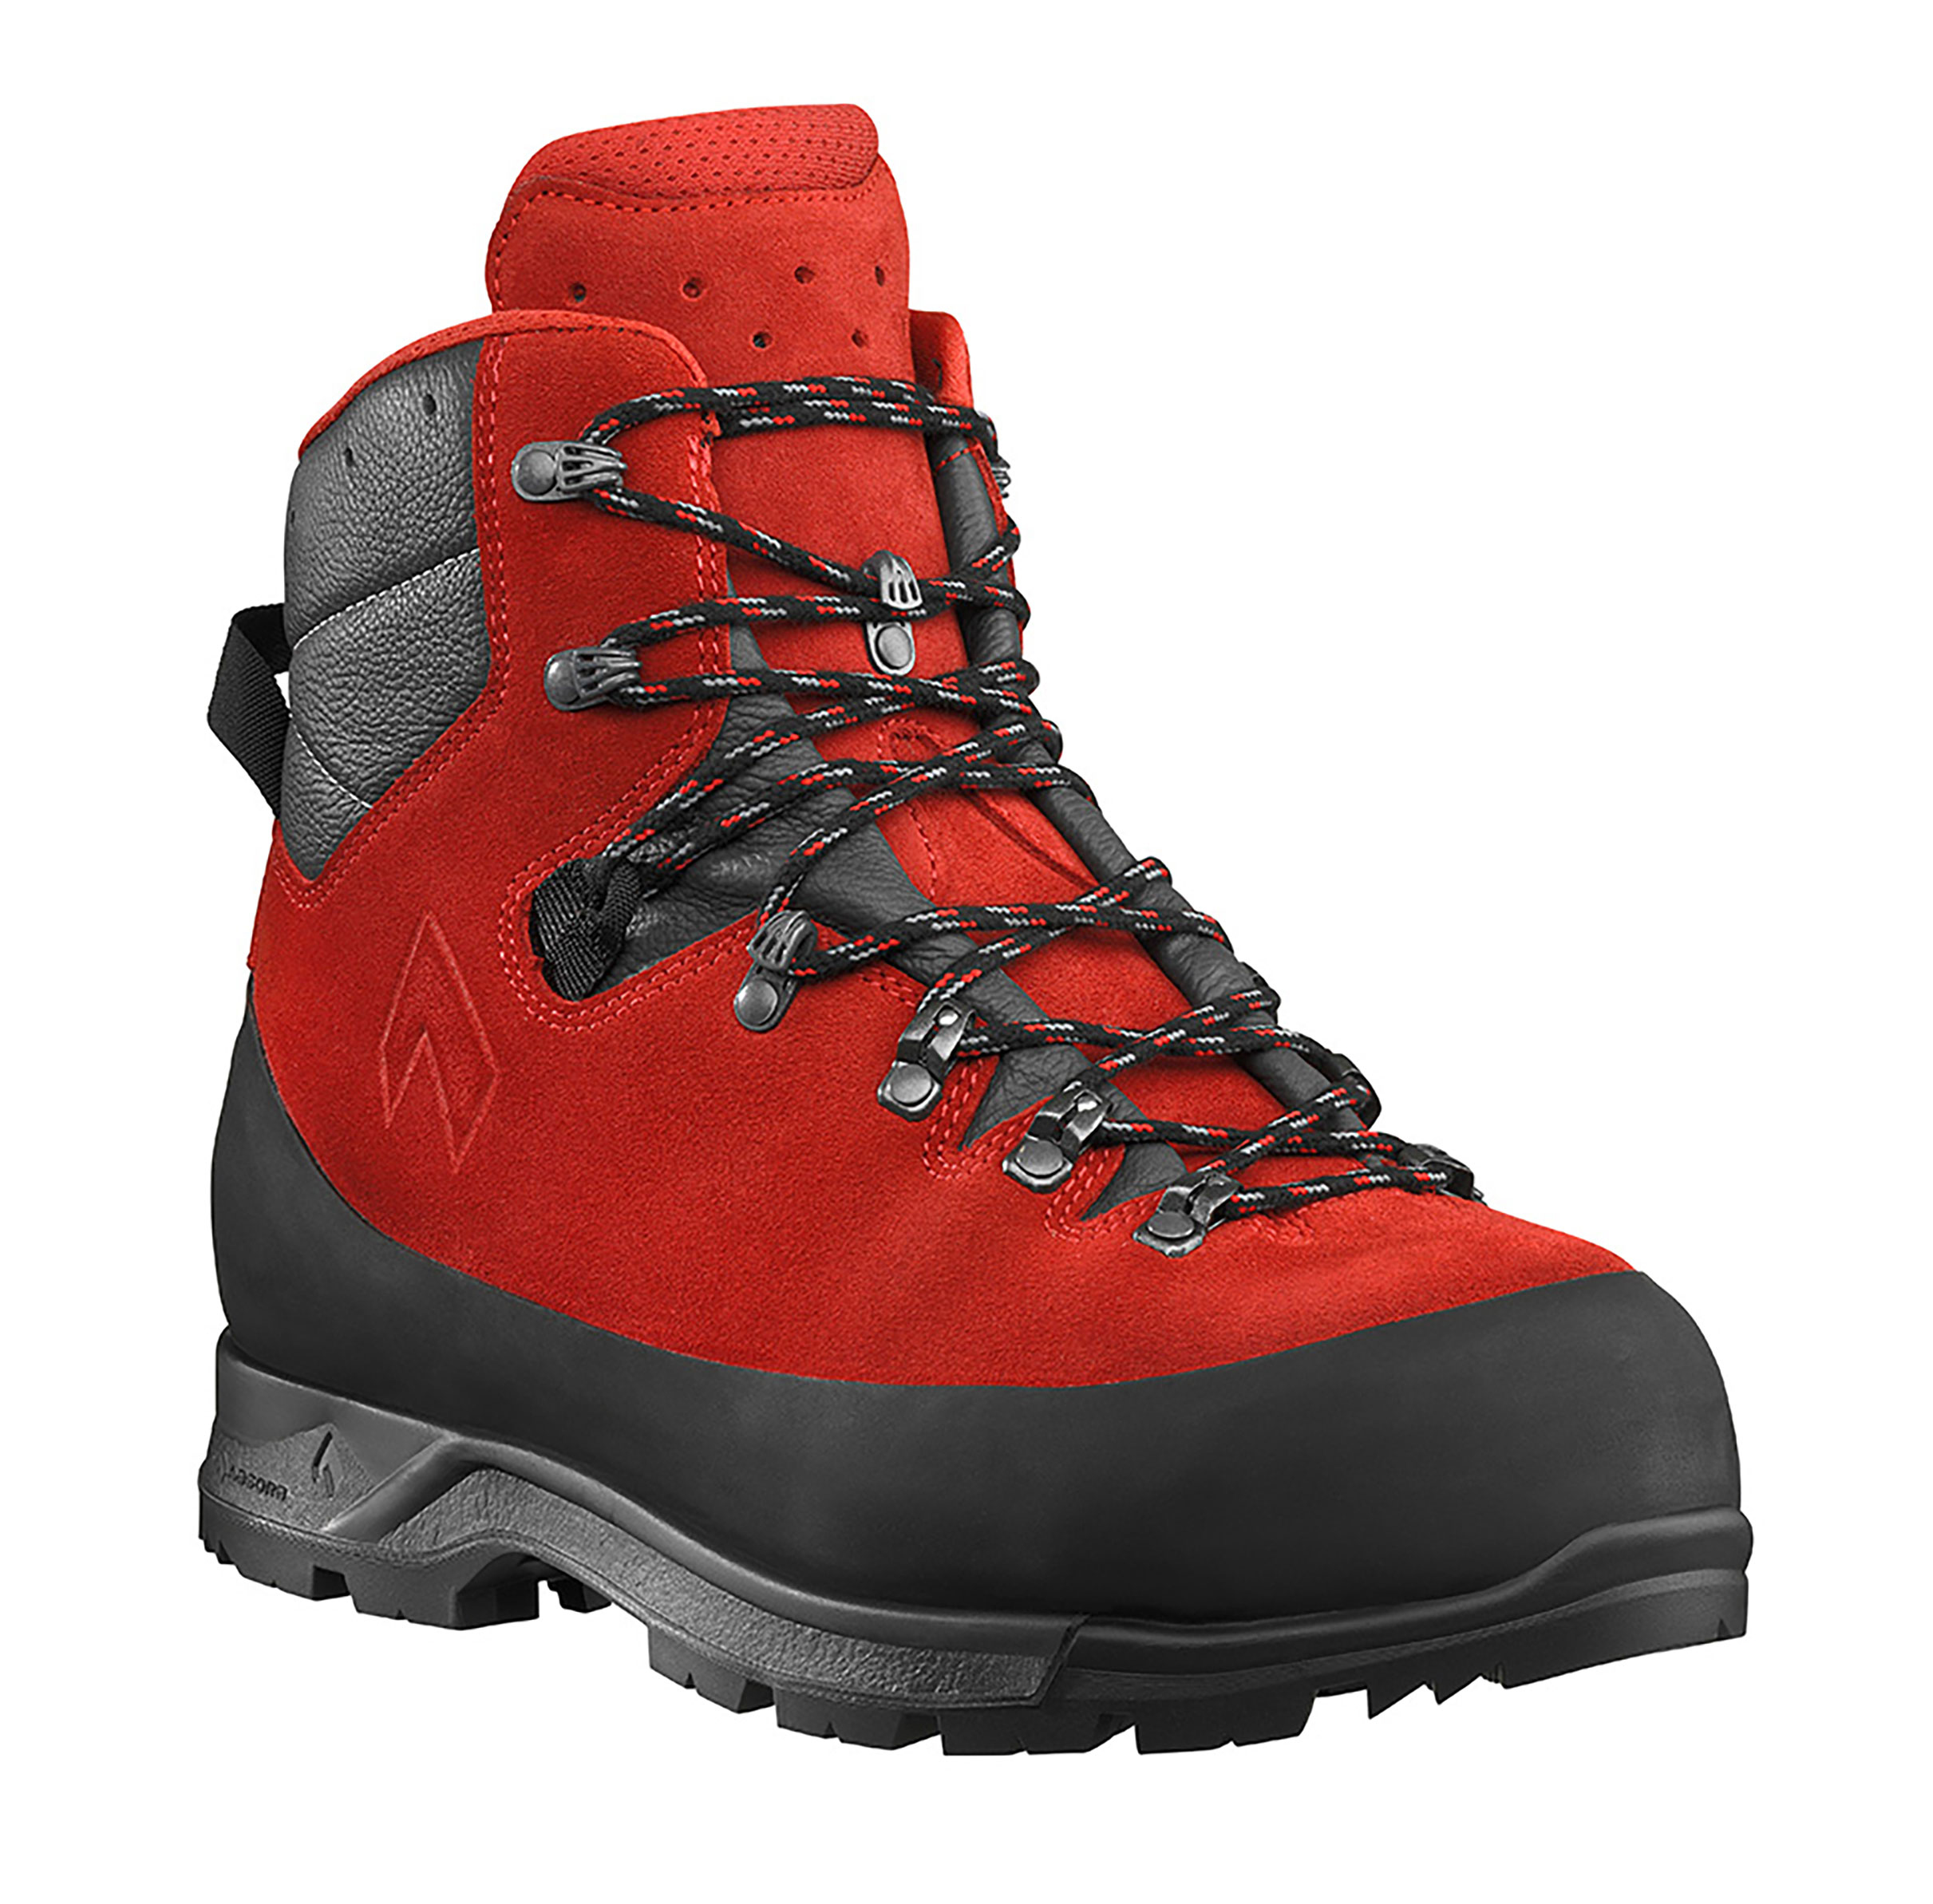 Chaussures anticoupure Haix Protector Forest 2.1 GTX mid rouge